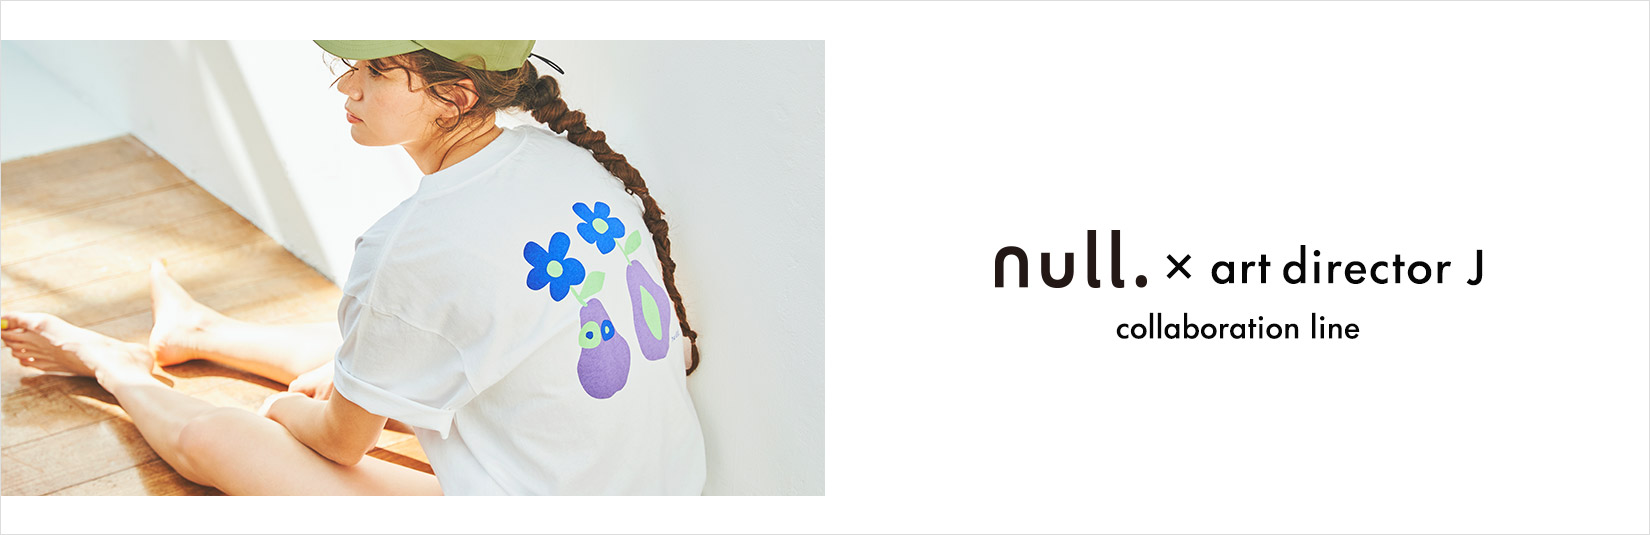 null.×art director J collacoration line